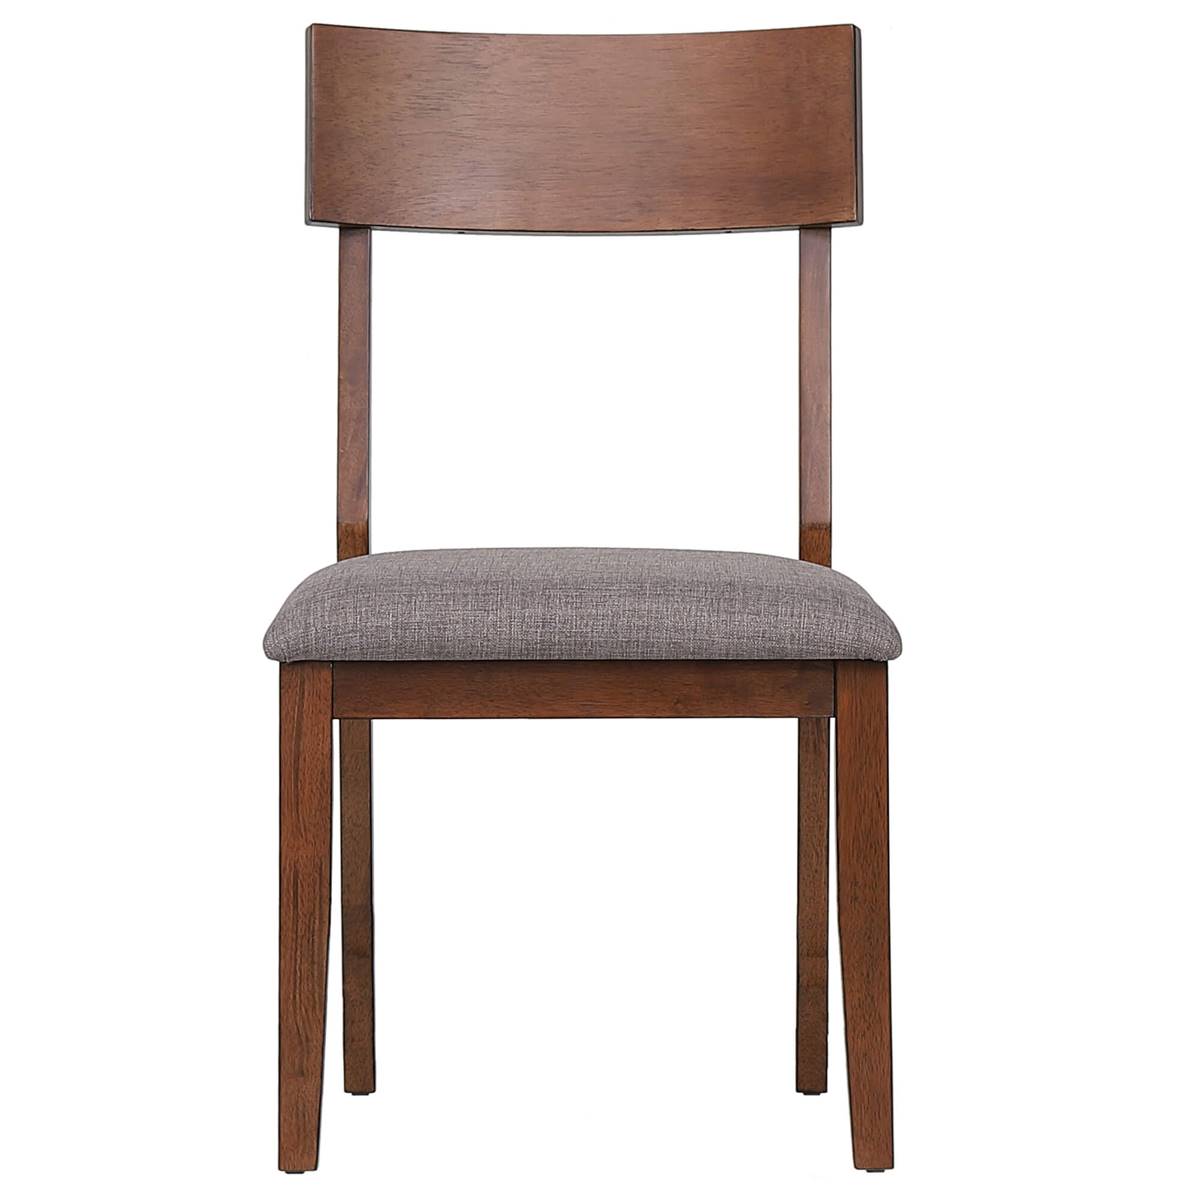 Besthom Mid-Century Upholstered Dining Chairs - Set Of 2